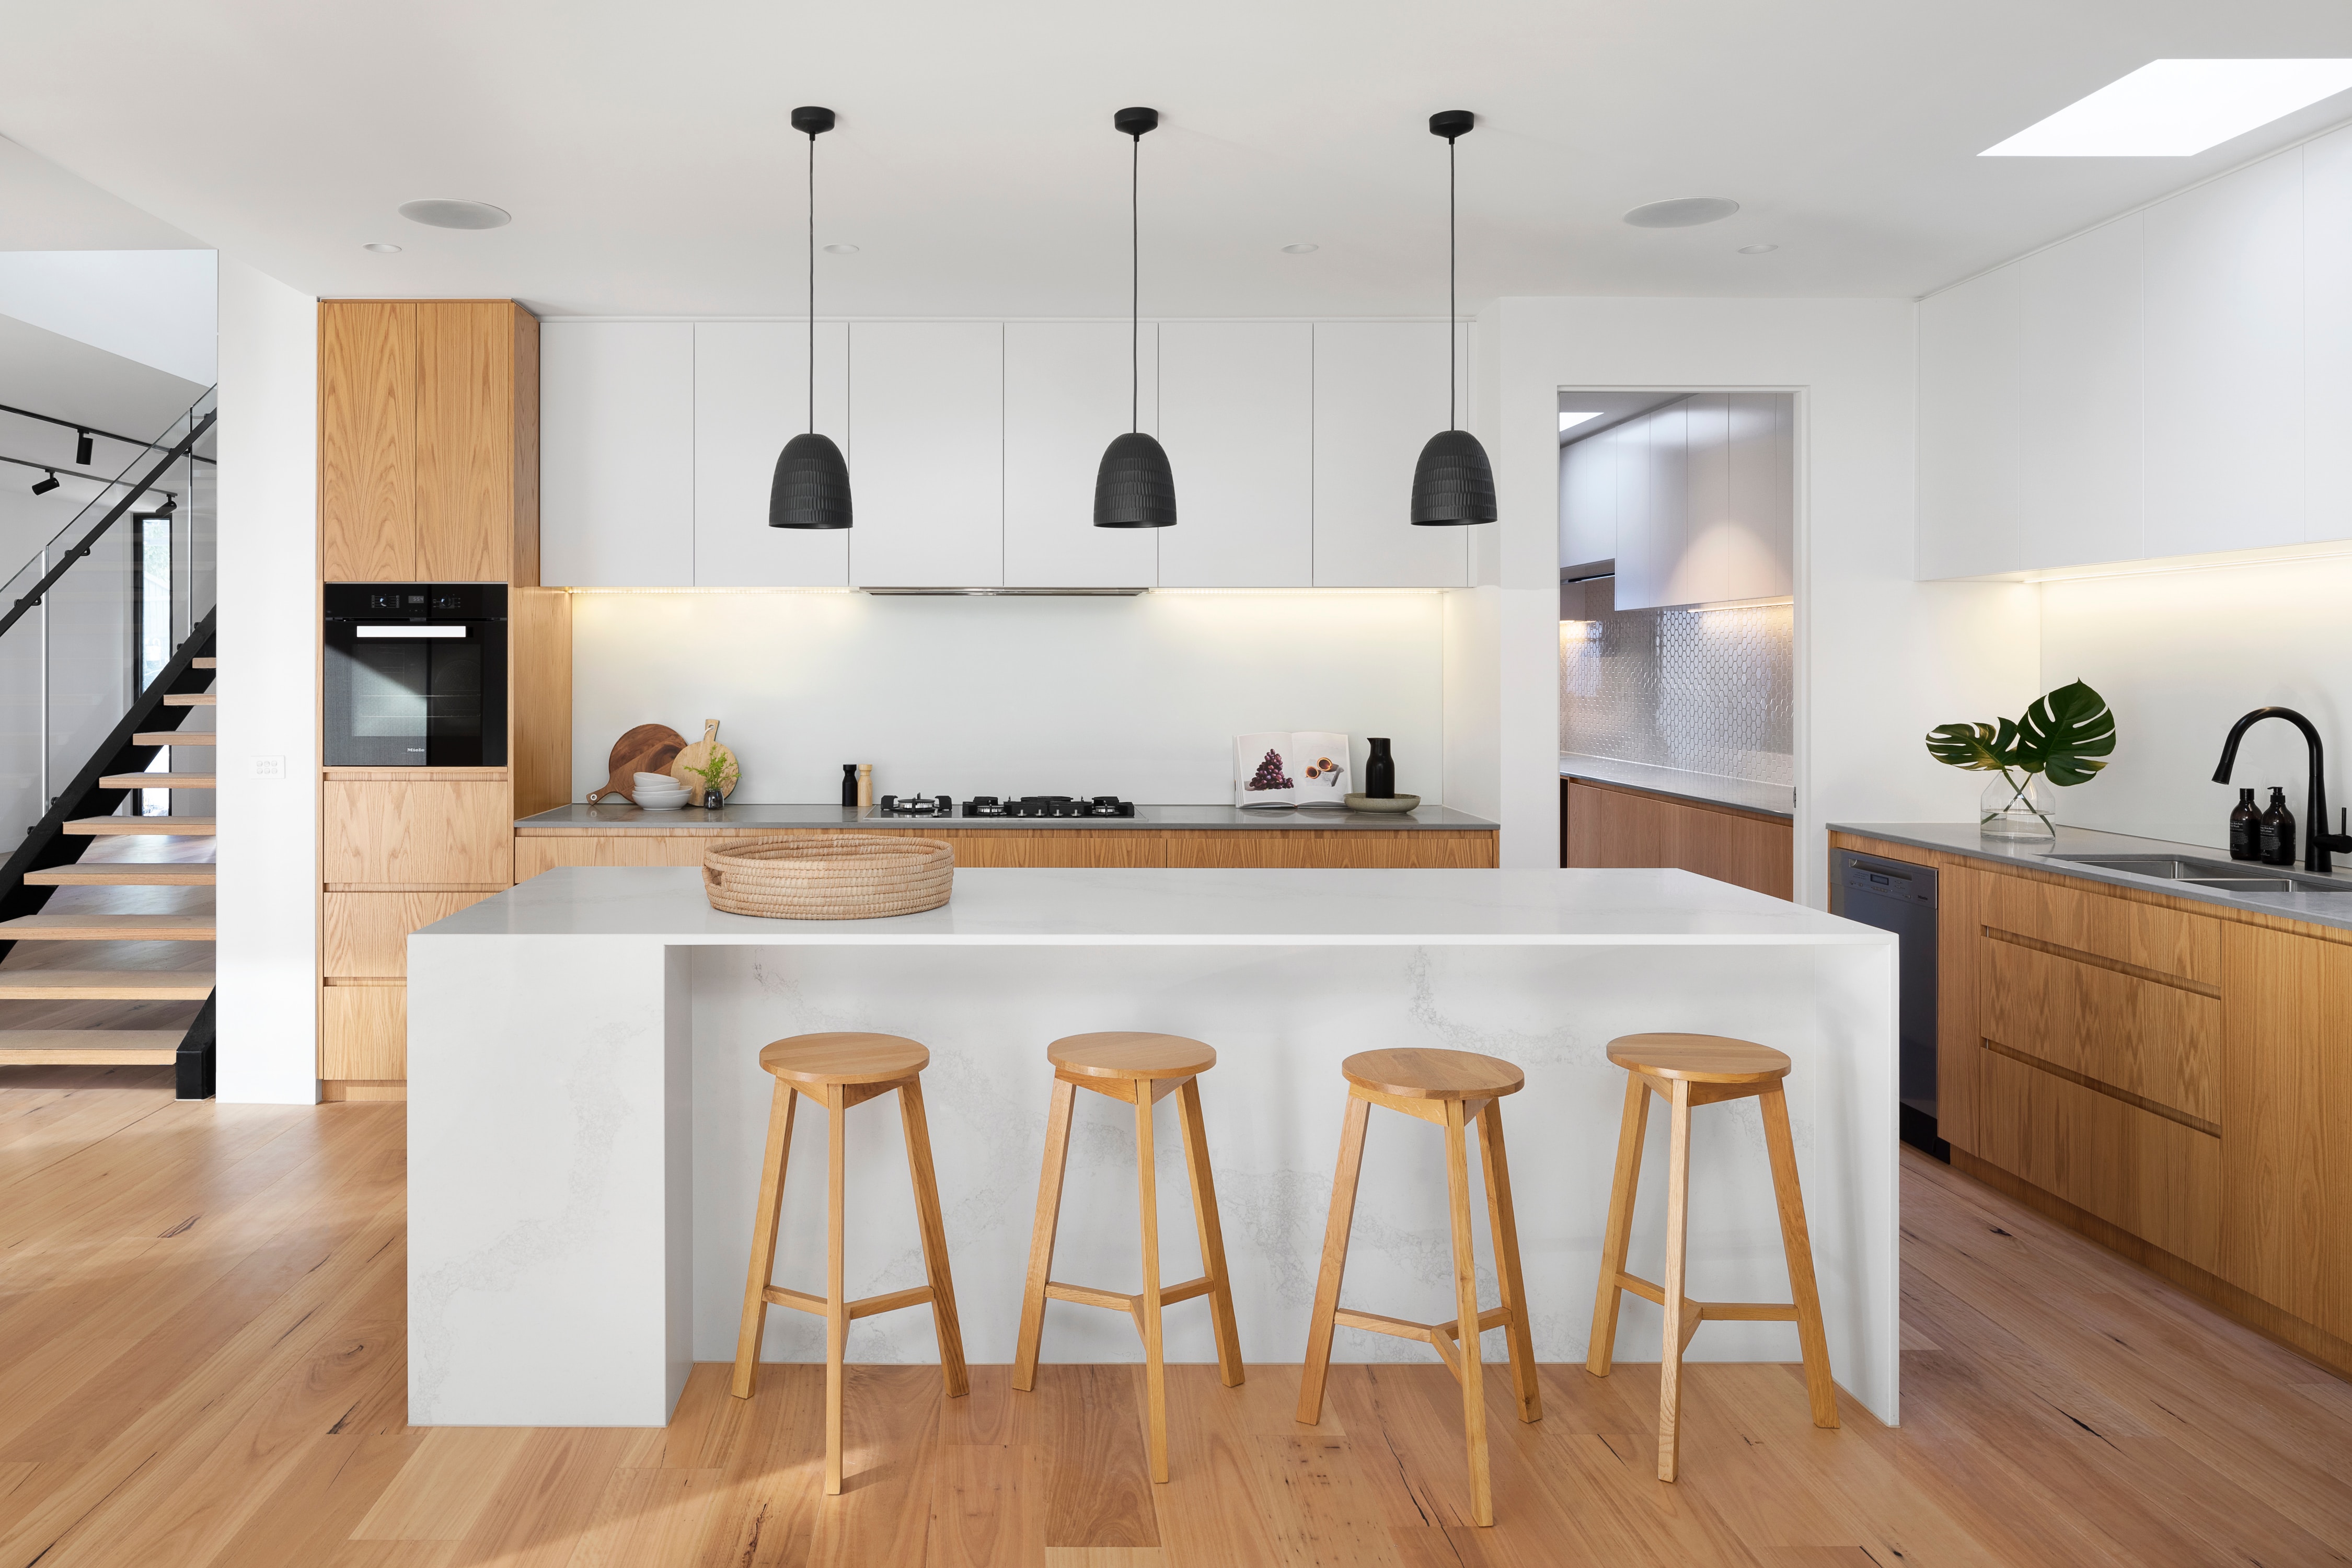 Kitchen with brown wooden seat beside white wooden table and pendant lights